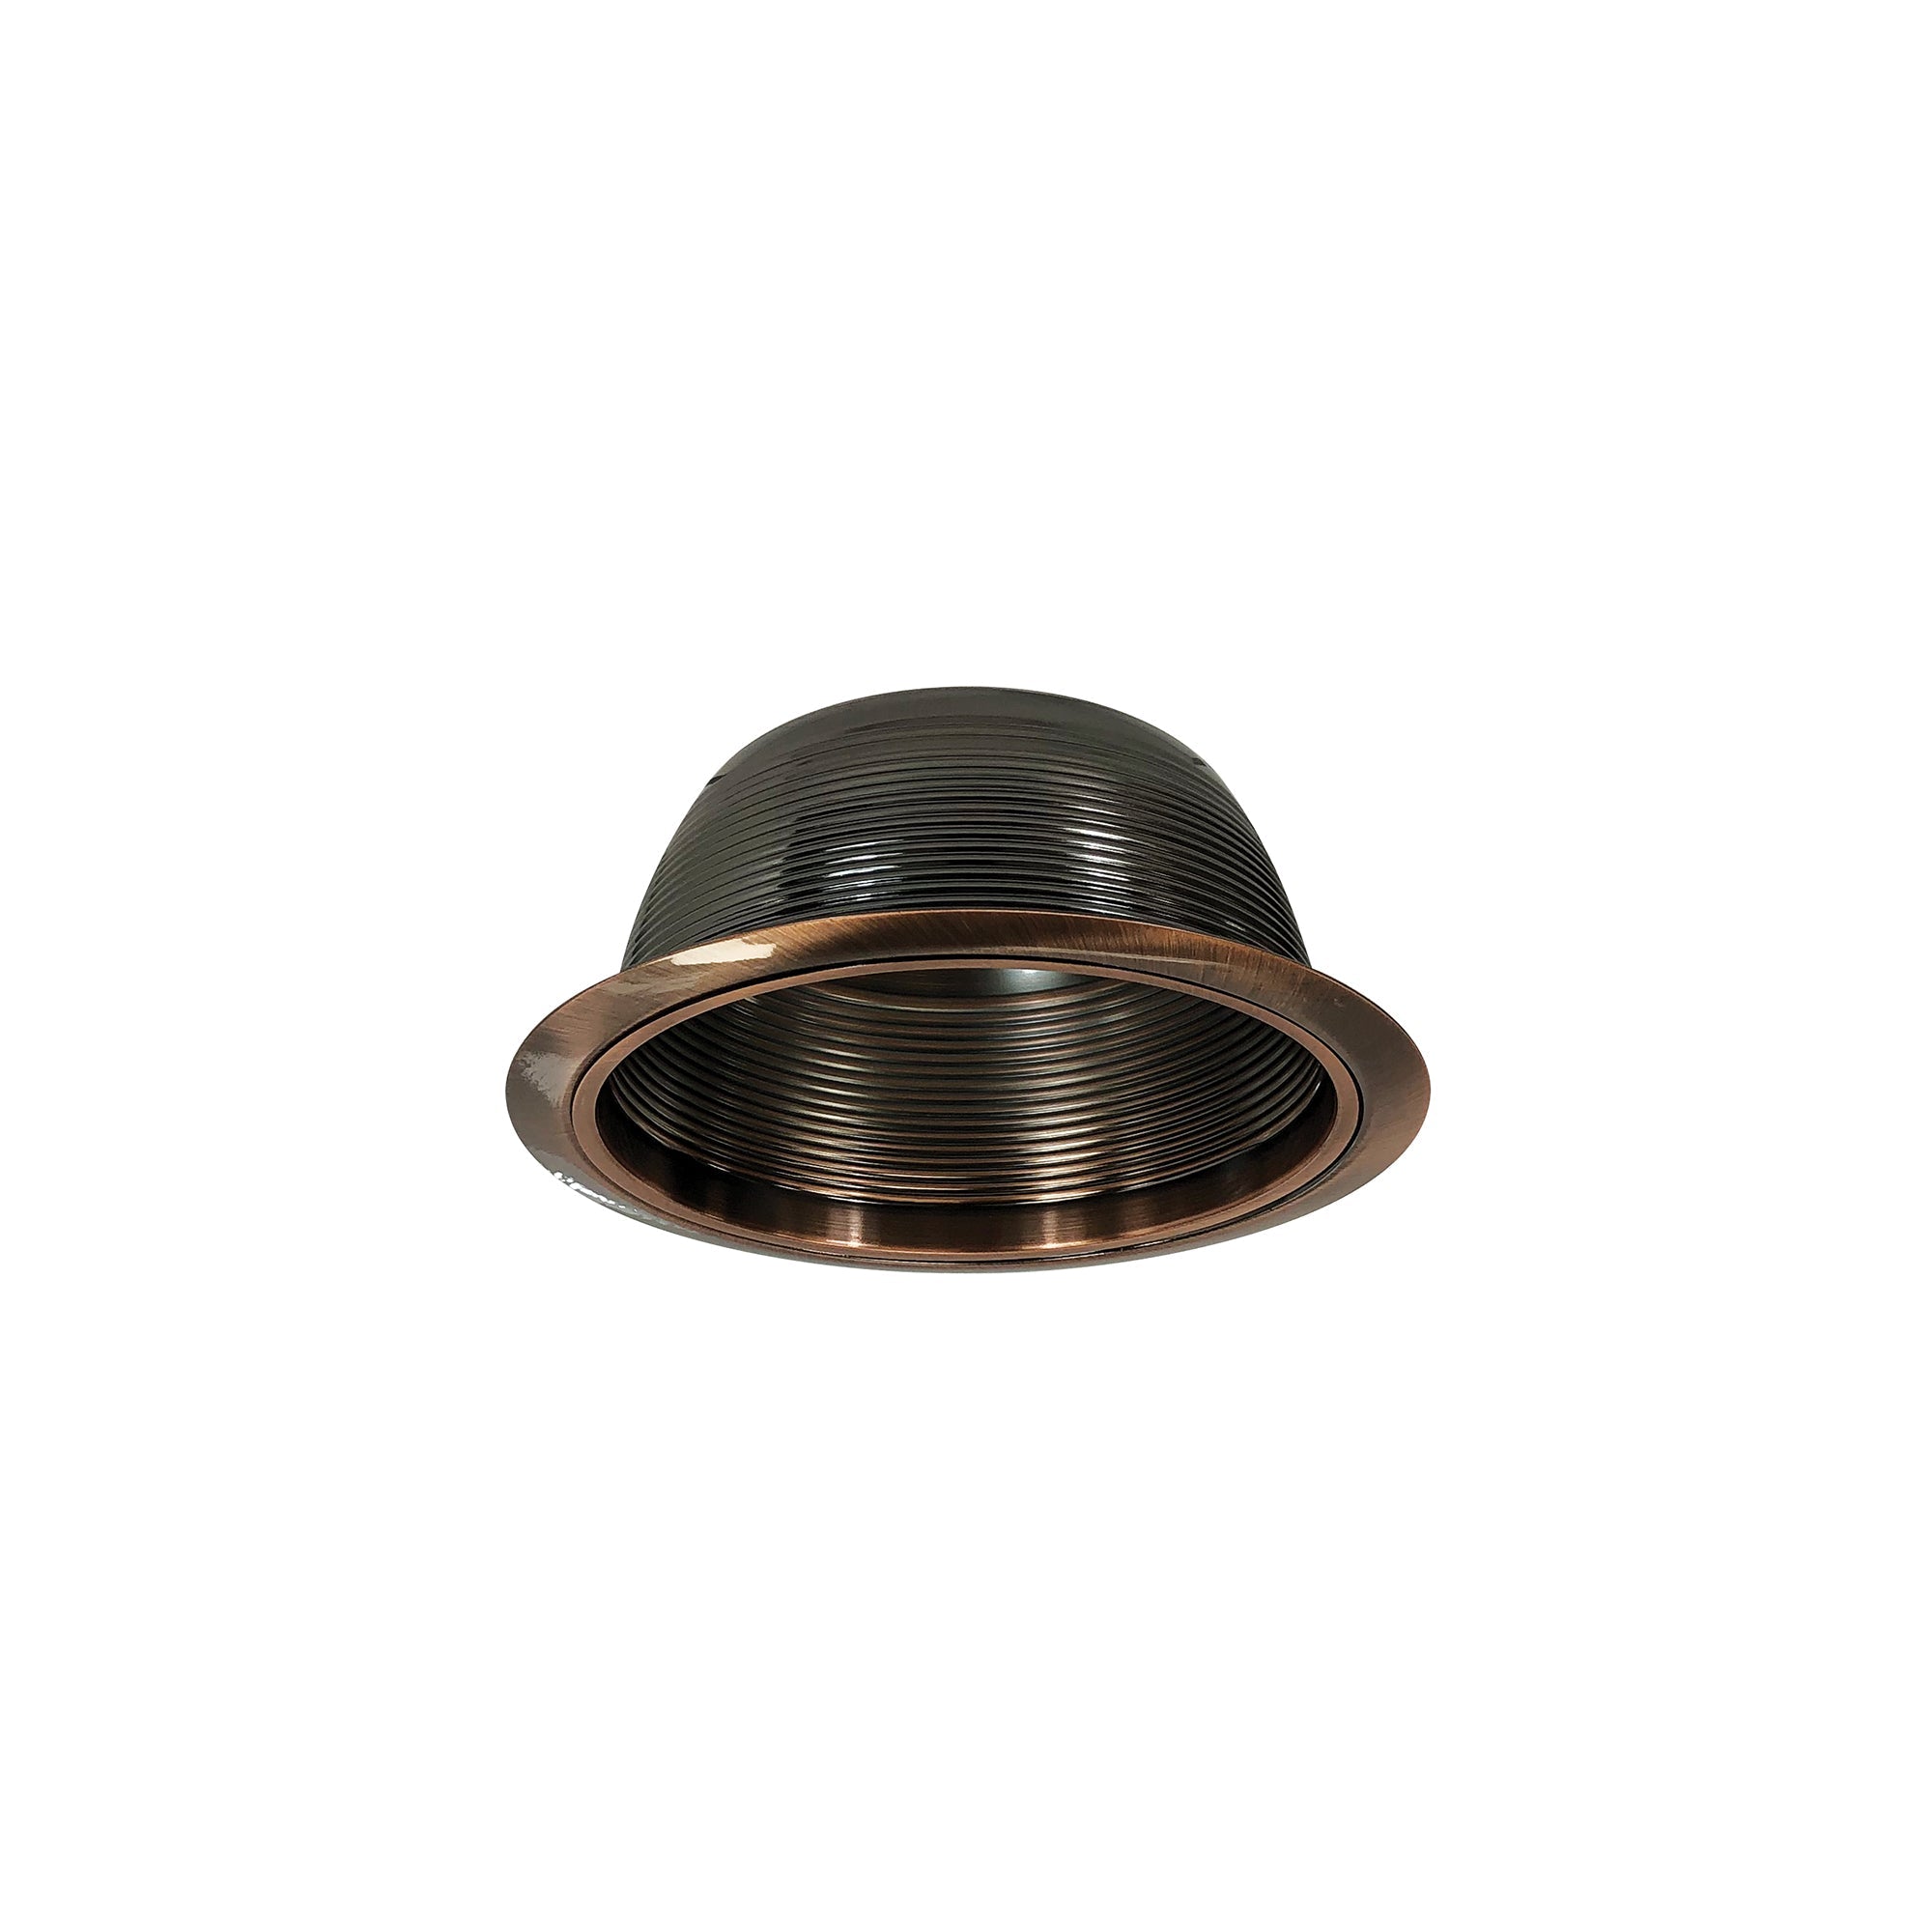 Nora Lighting NTM-33 - Recessed - 6 Inch BR/PAR30 Stepped Baffle w/ Metal Ring, Copper